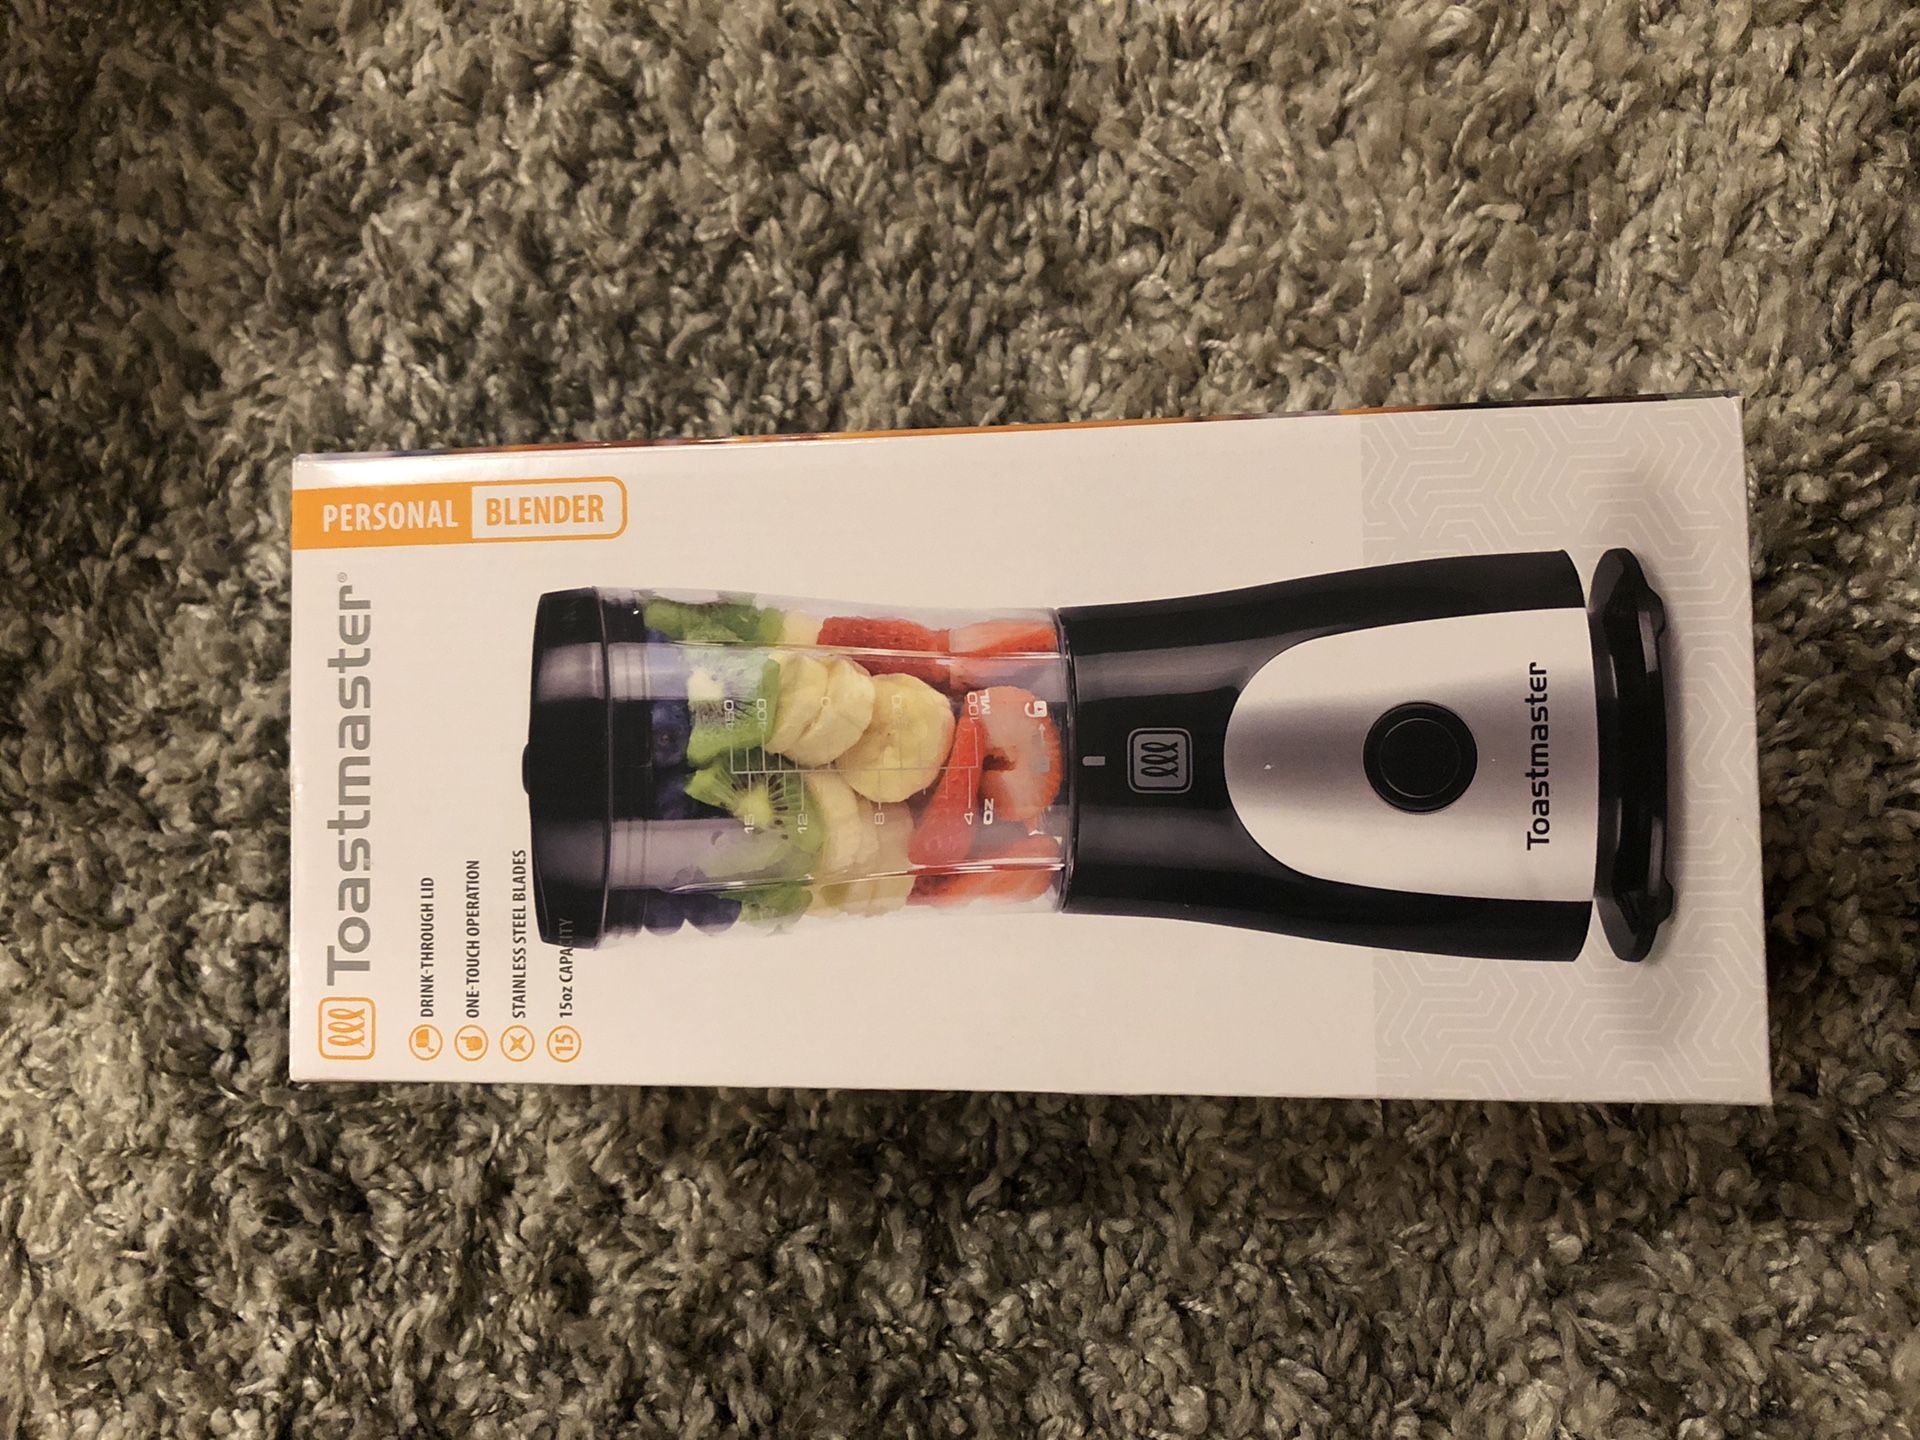 Toastmaster personal blender black 15 Oz capacity new in box home appliance kitchen household